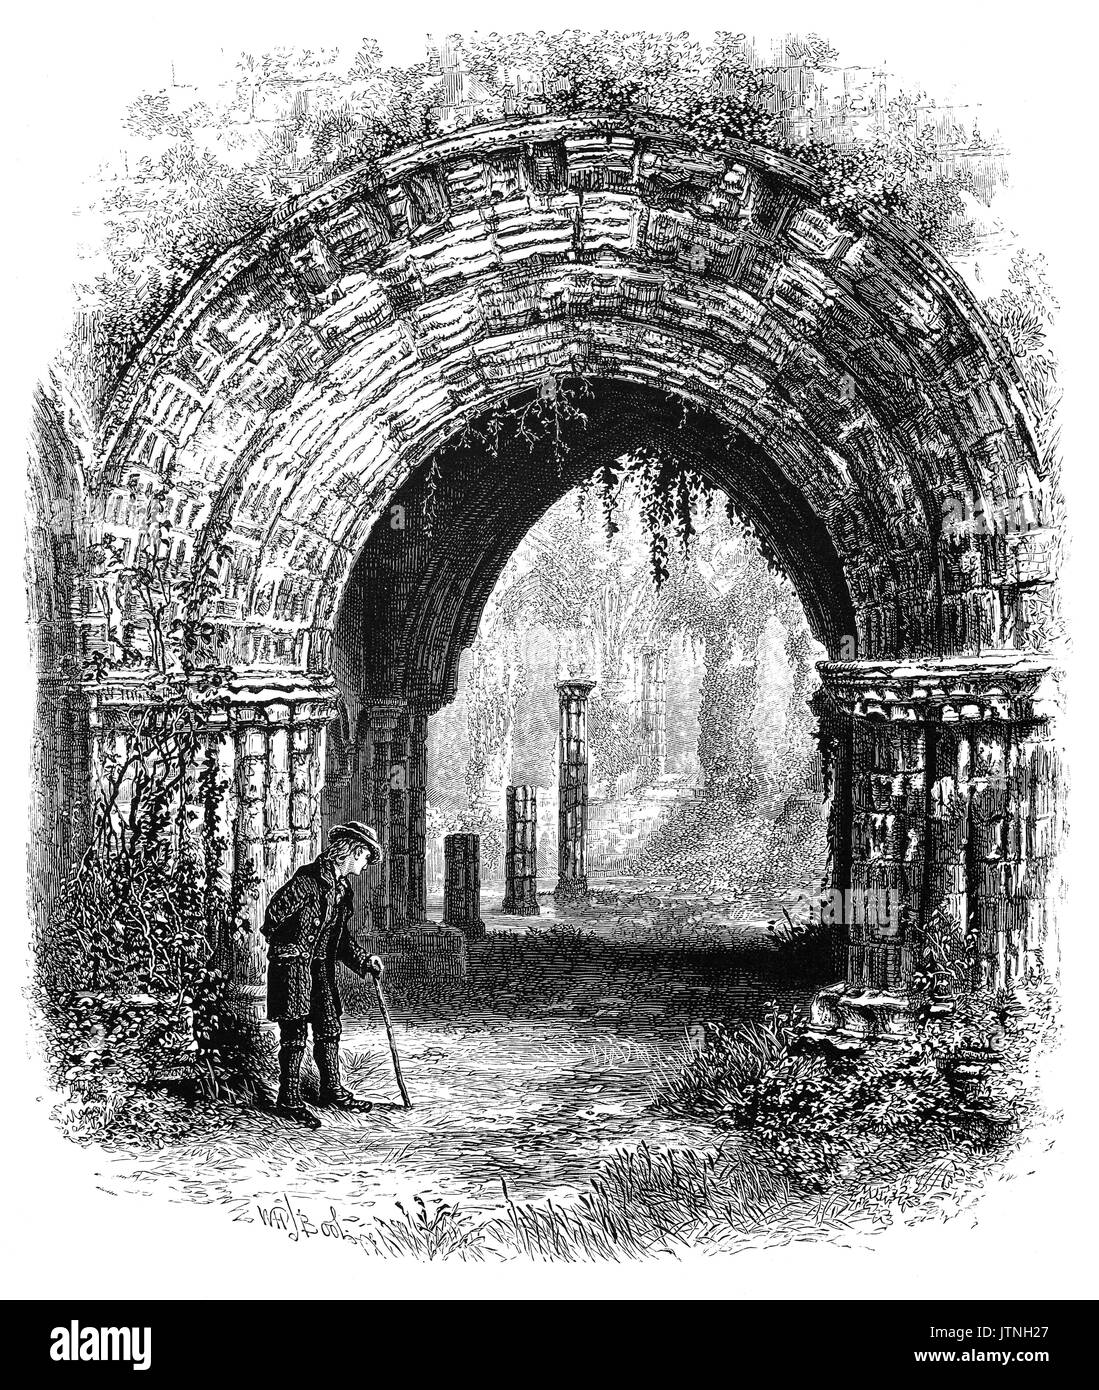 1870: Old man beside a beautiful Romanesque arch in Furness Abbey, or St. Mary of Furness is a former Cistercian monastery located in the northern outskirts of Barrow-in-Furness, Cumbria, England. The abbey dates back to 1123. Stock Photo